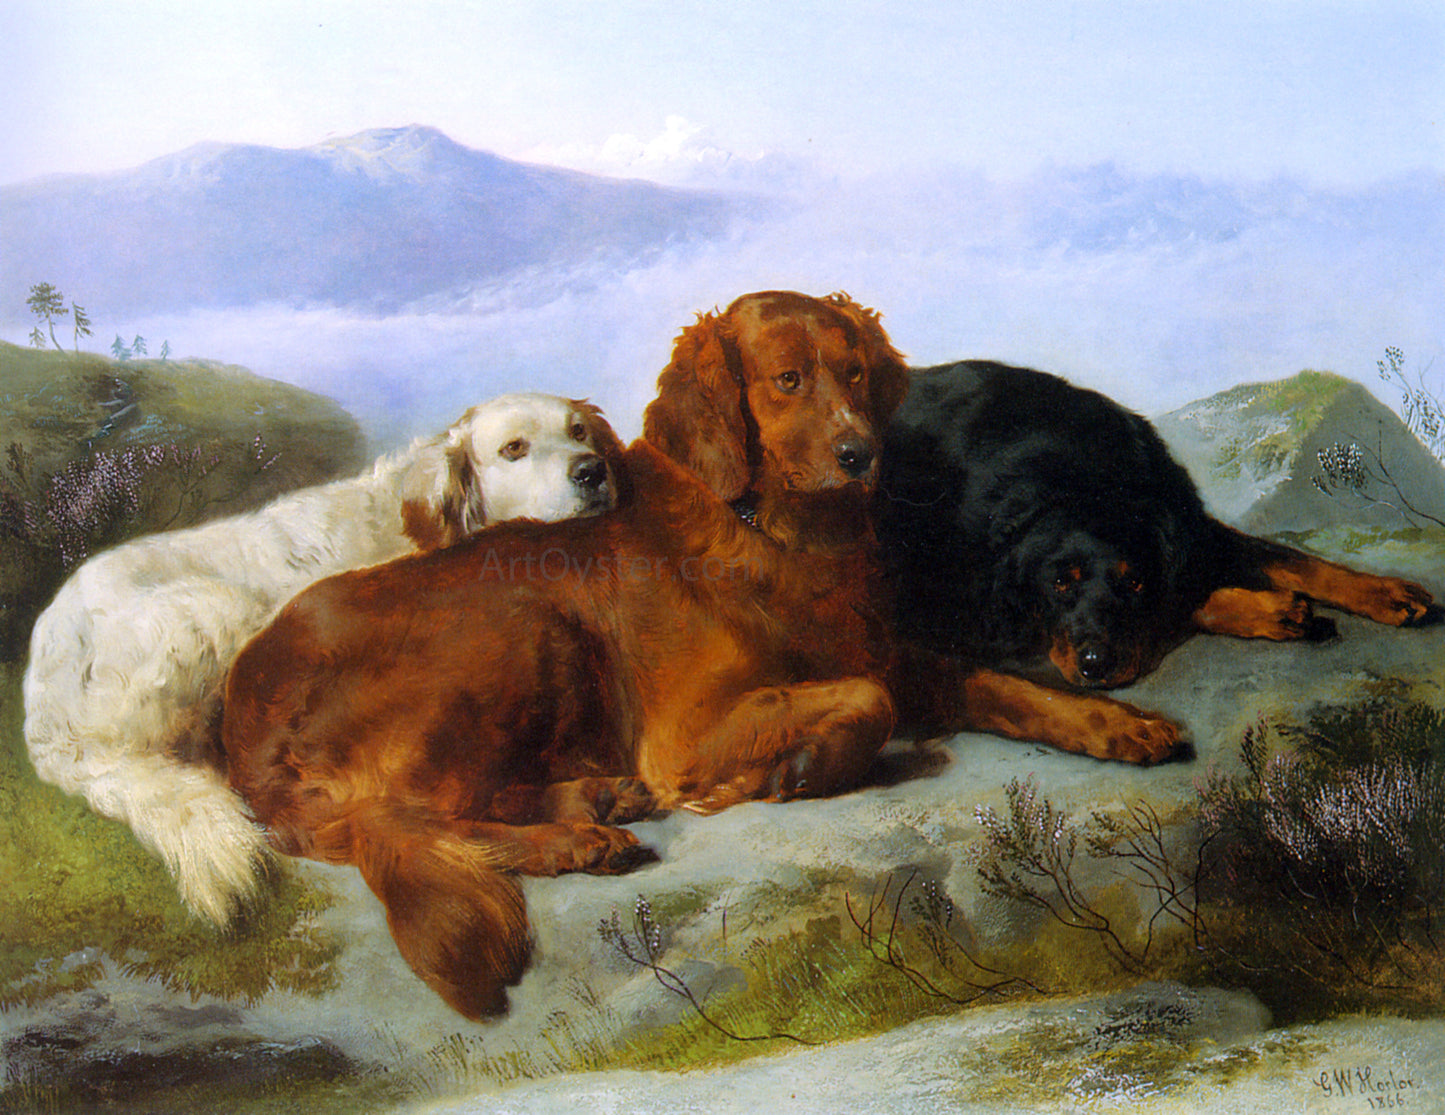  George W Horlor A Golden Retriever, Irish Setter, and a Gordon Setter in a Mountainous Landscape - Hand Painted Oil Painting